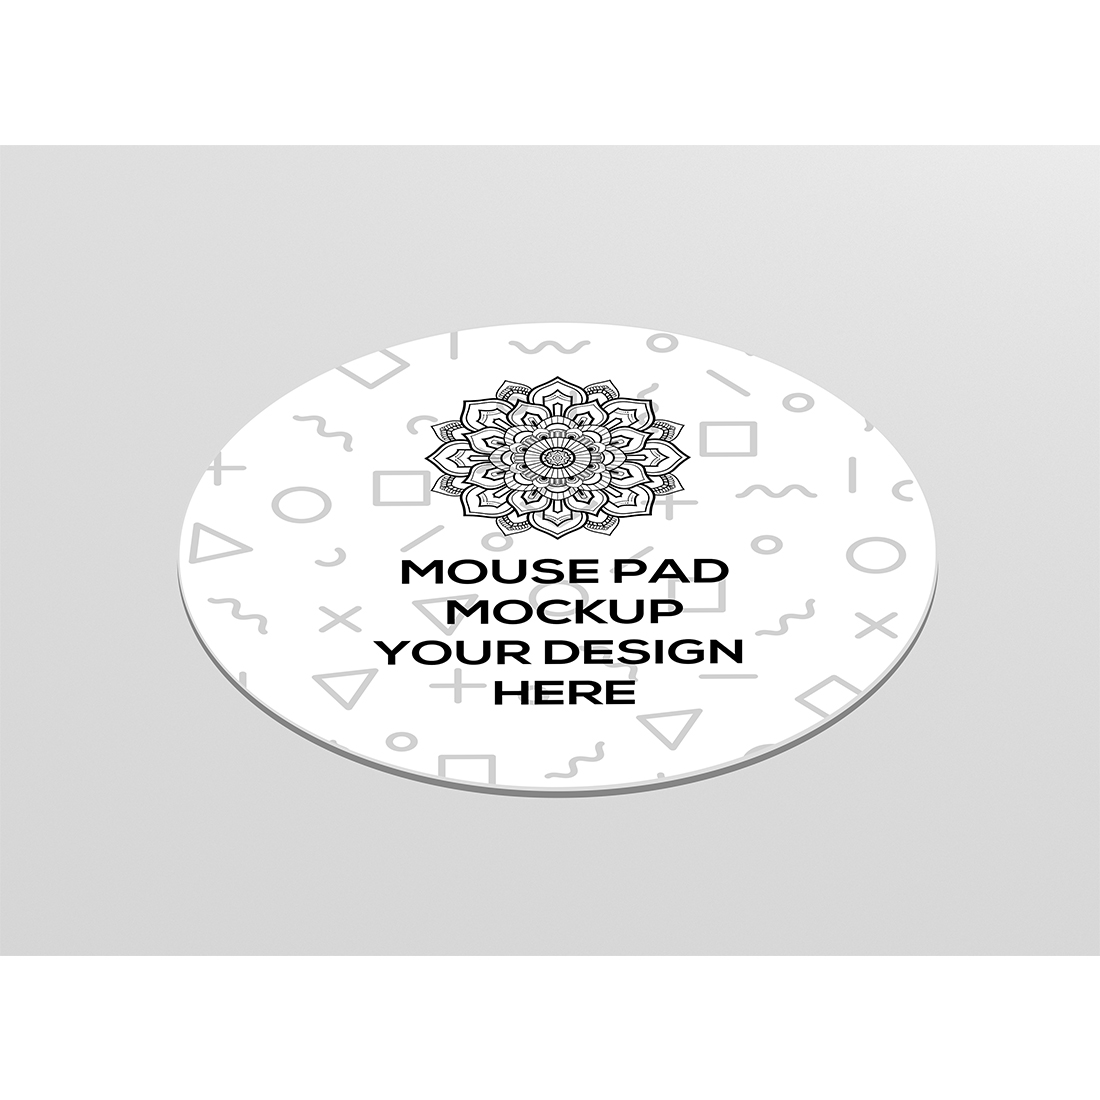 Mouse Pad Mockup preview image.